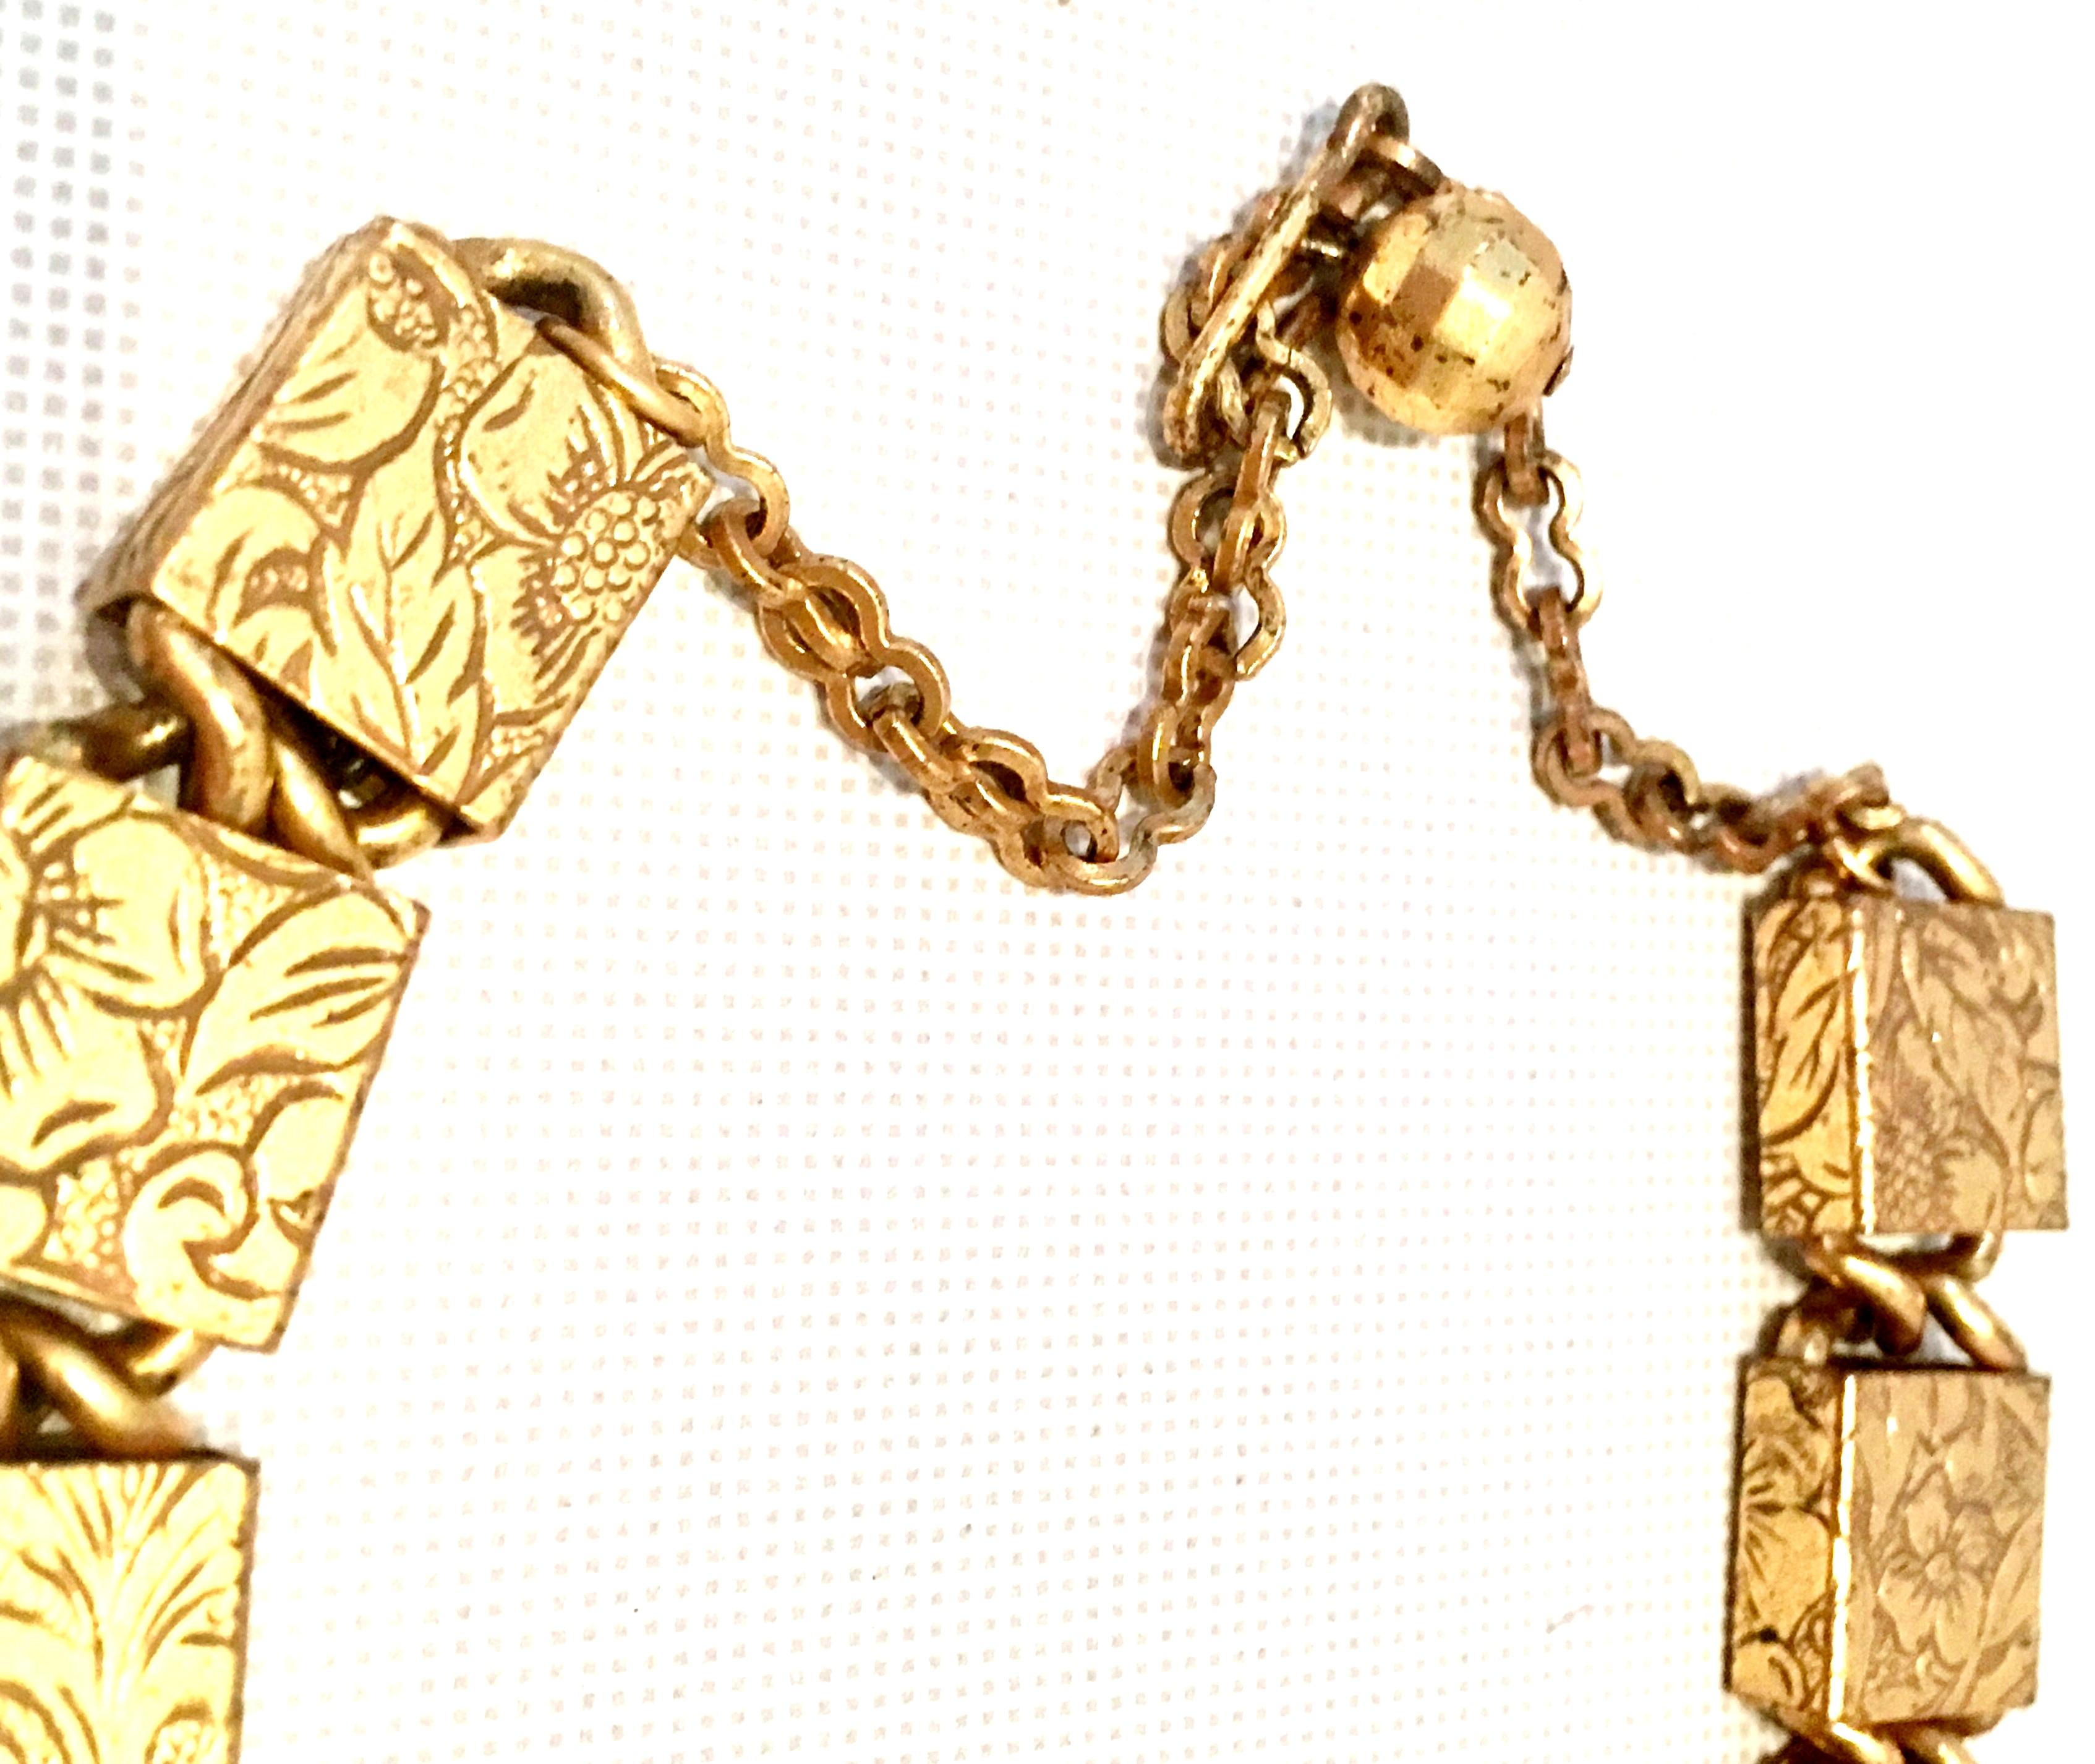 20th Century Art Nouveau Gold Book Chain Choker Style Necklace & Earrings S/3 For Sale 4